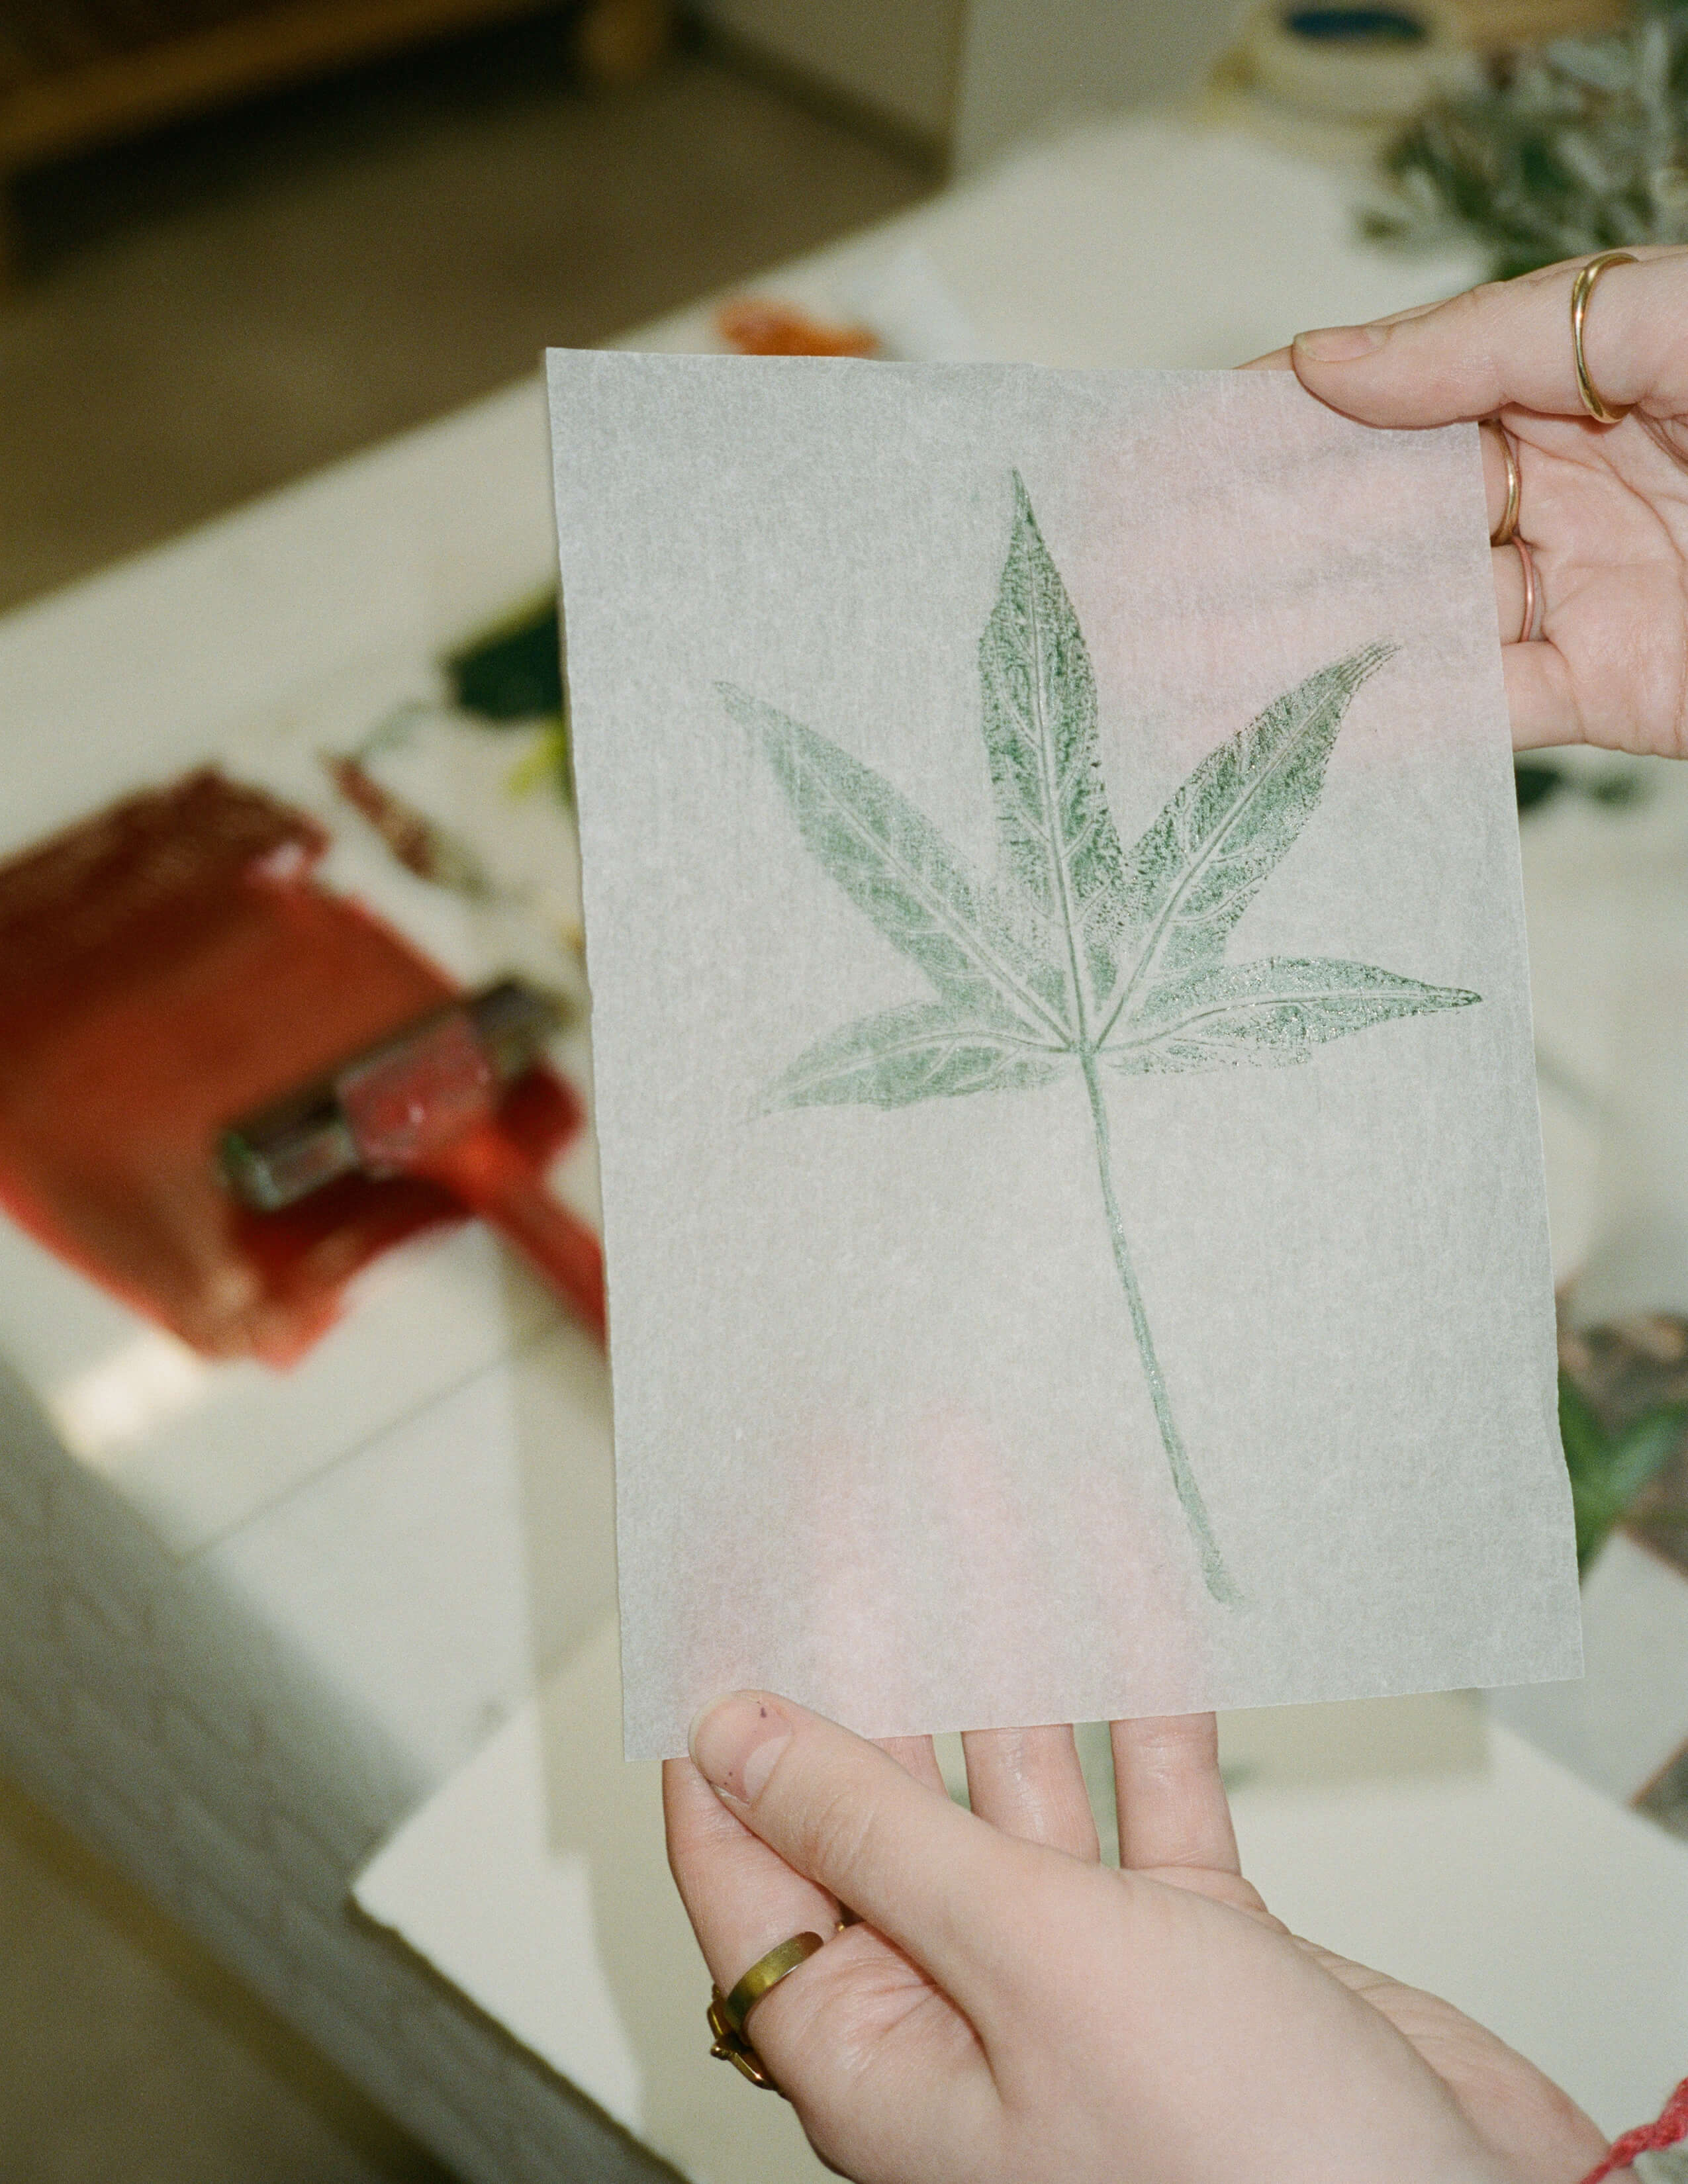 A pair of hands presenting a successful nature plant printing on the paper.